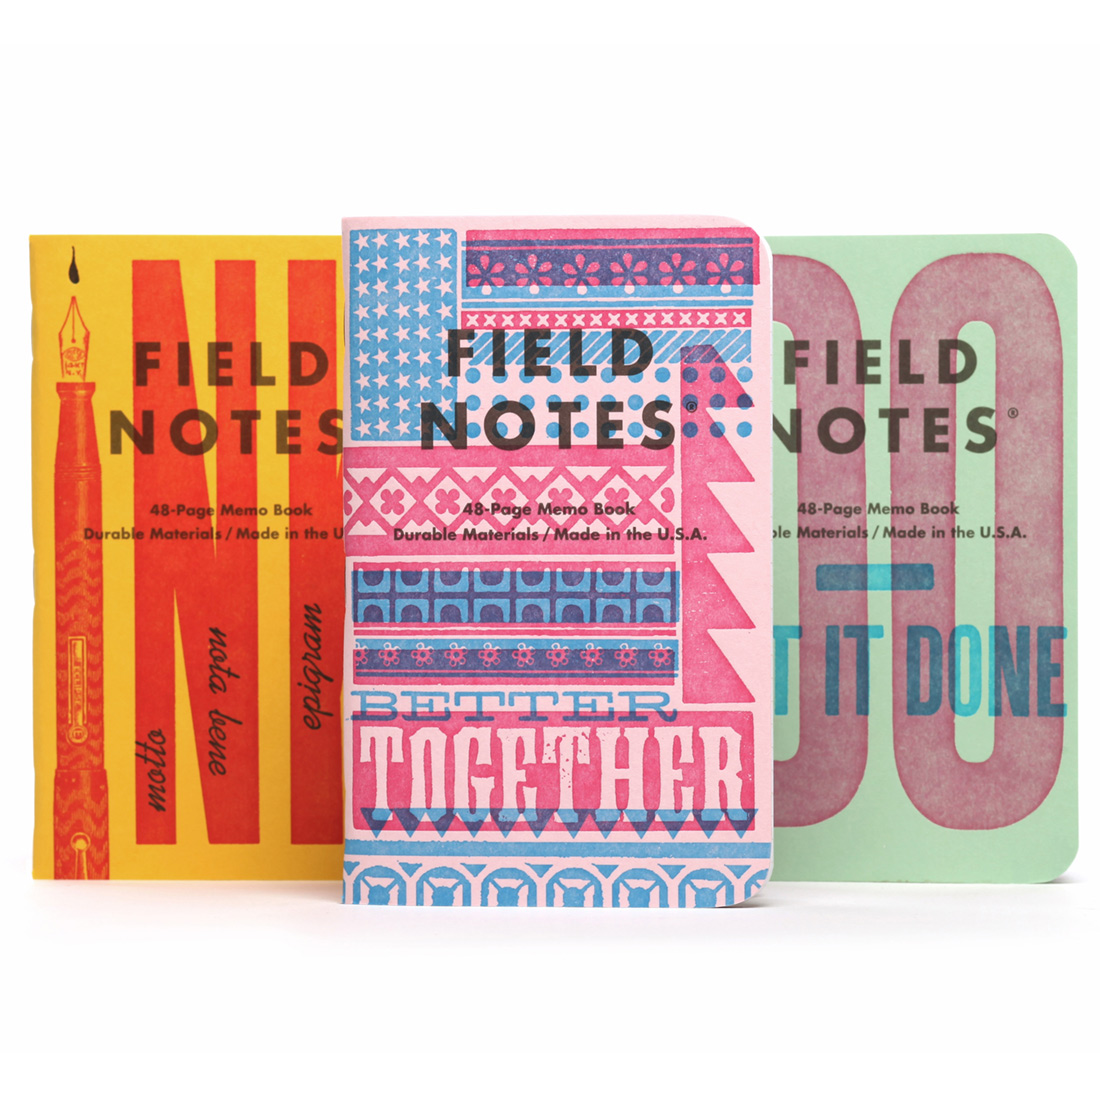 United States of Letterpress B 3-Pack in the group Paper & Pads / Note & Memo / Writing & Memo Pads at Pen Store (125130)